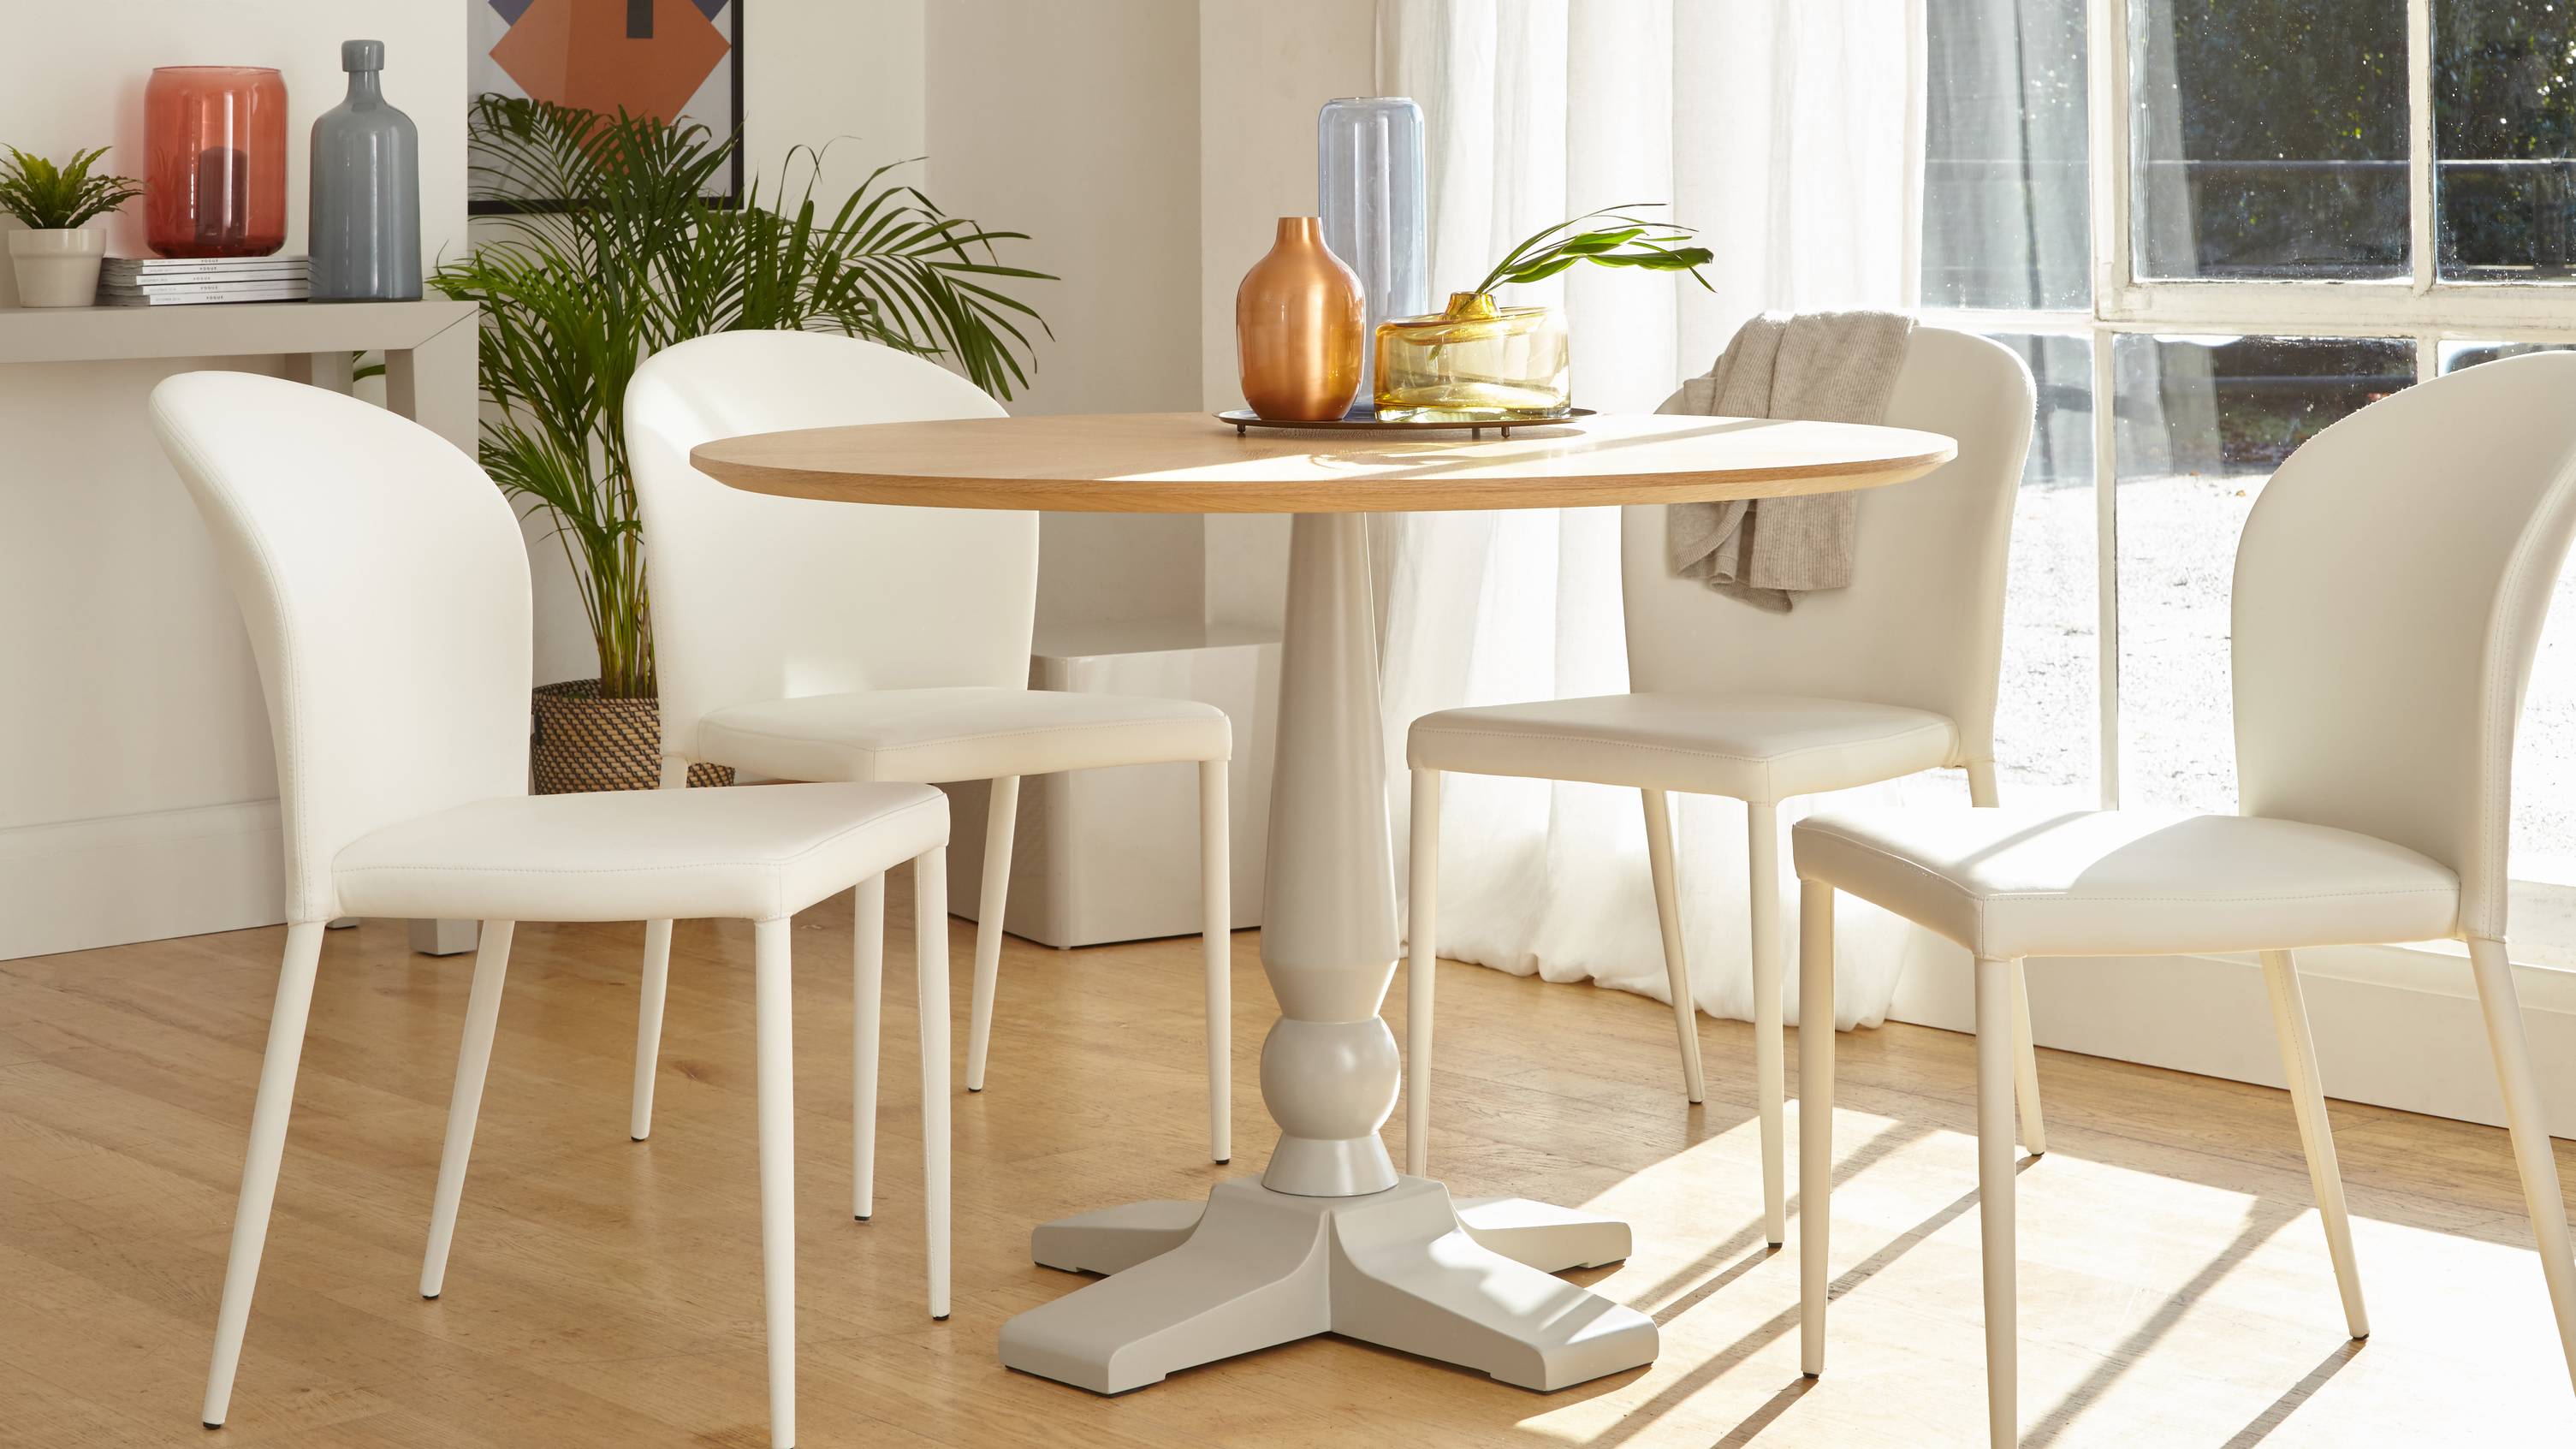 Modern dining table and chairs set